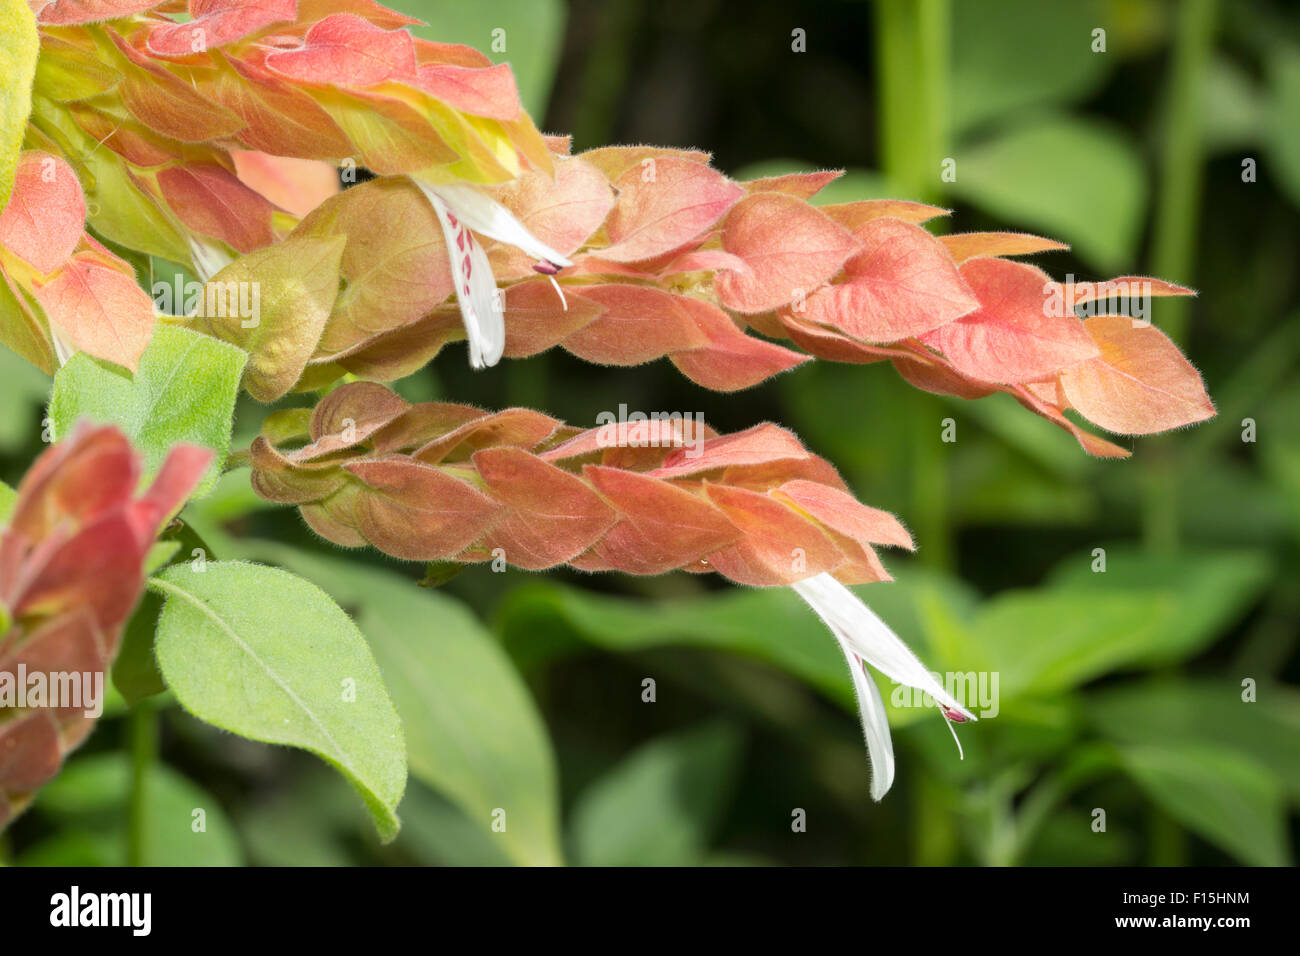 White flowers emerge from reddish bracts in the evergreen, sub-tropical shrimp plant, Justicia brandegeana Stock Photo